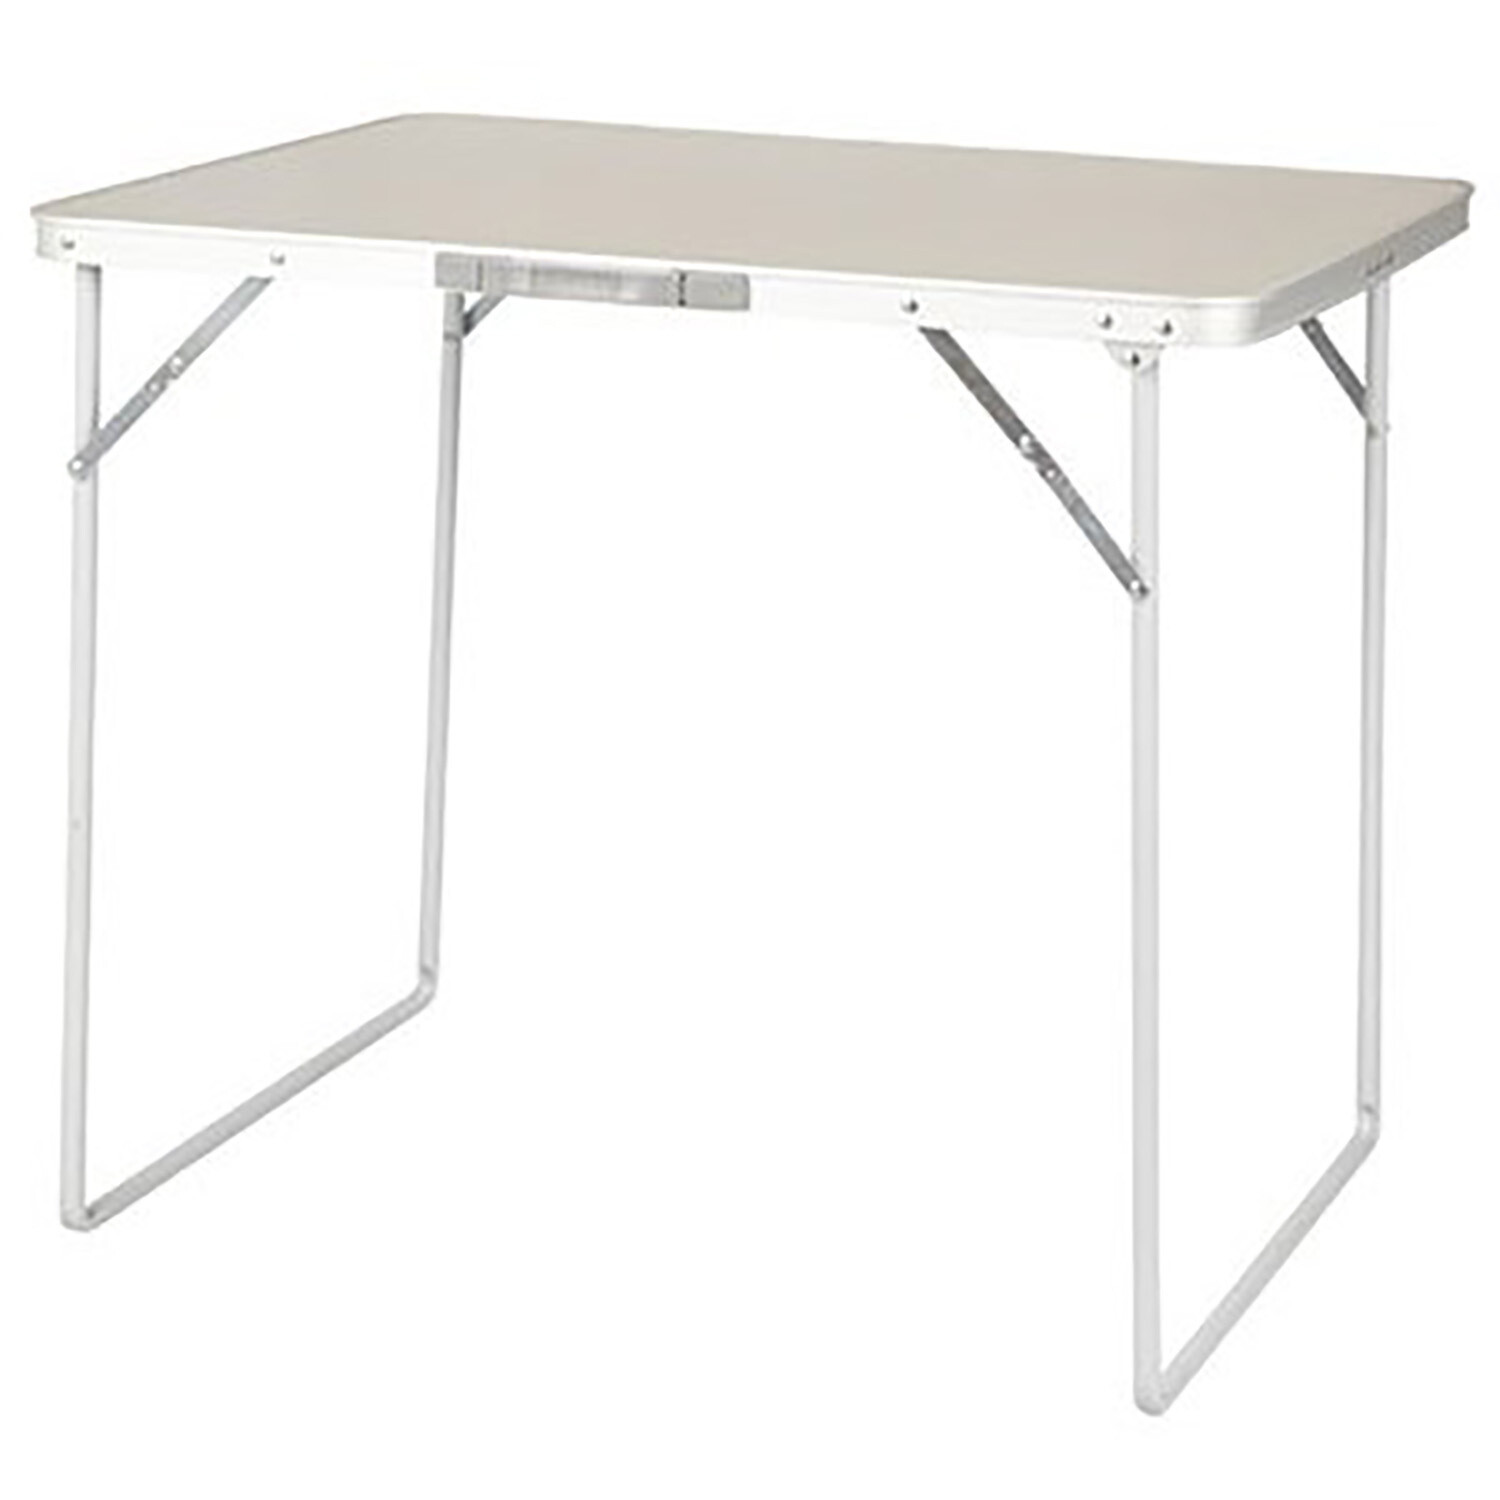 Active Sport White Camping Table Image